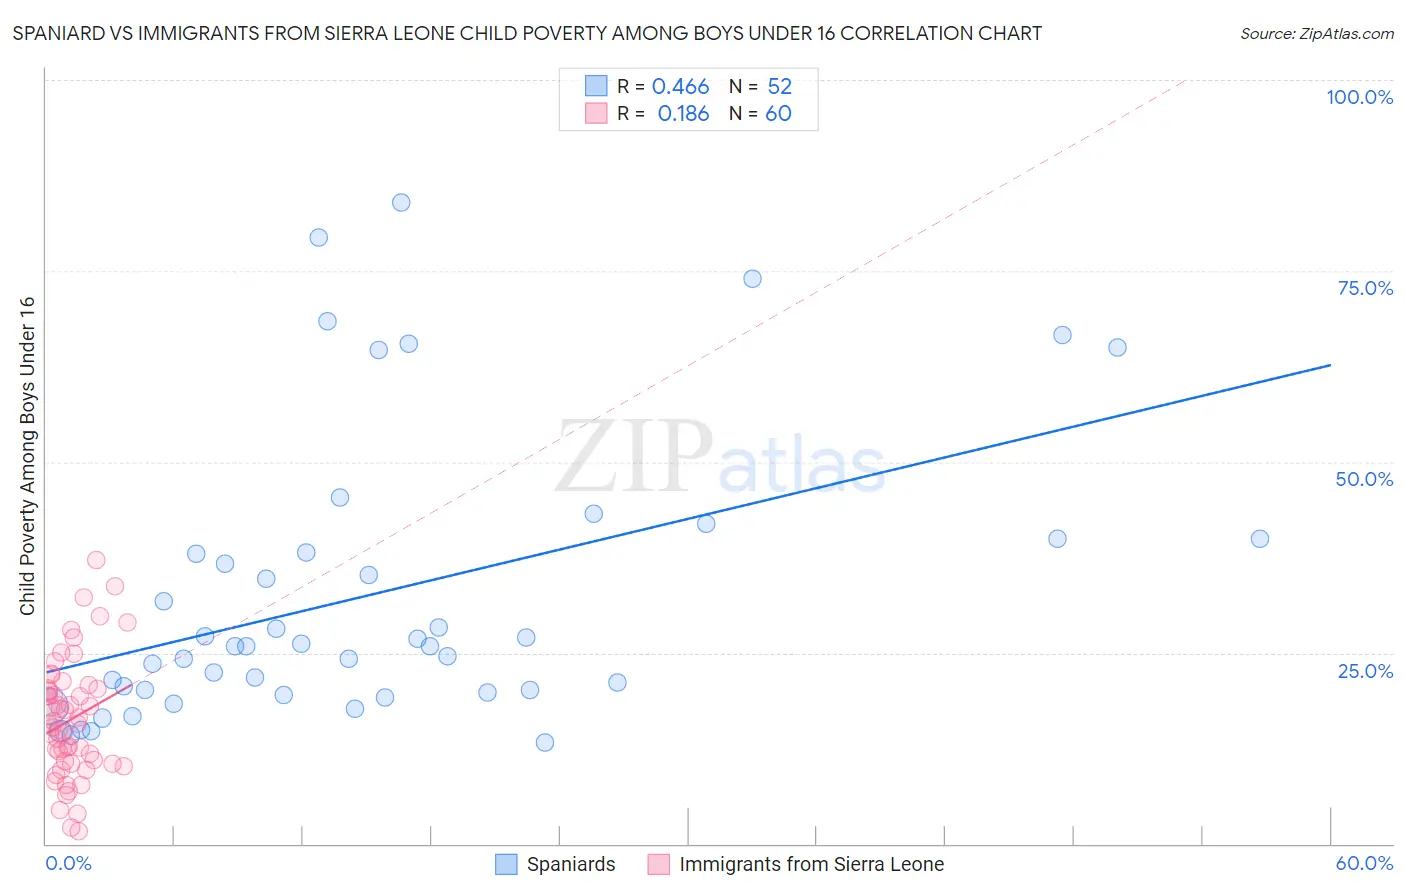 Spaniard vs Immigrants from Sierra Leone Child Poverty Among Boys Under 16